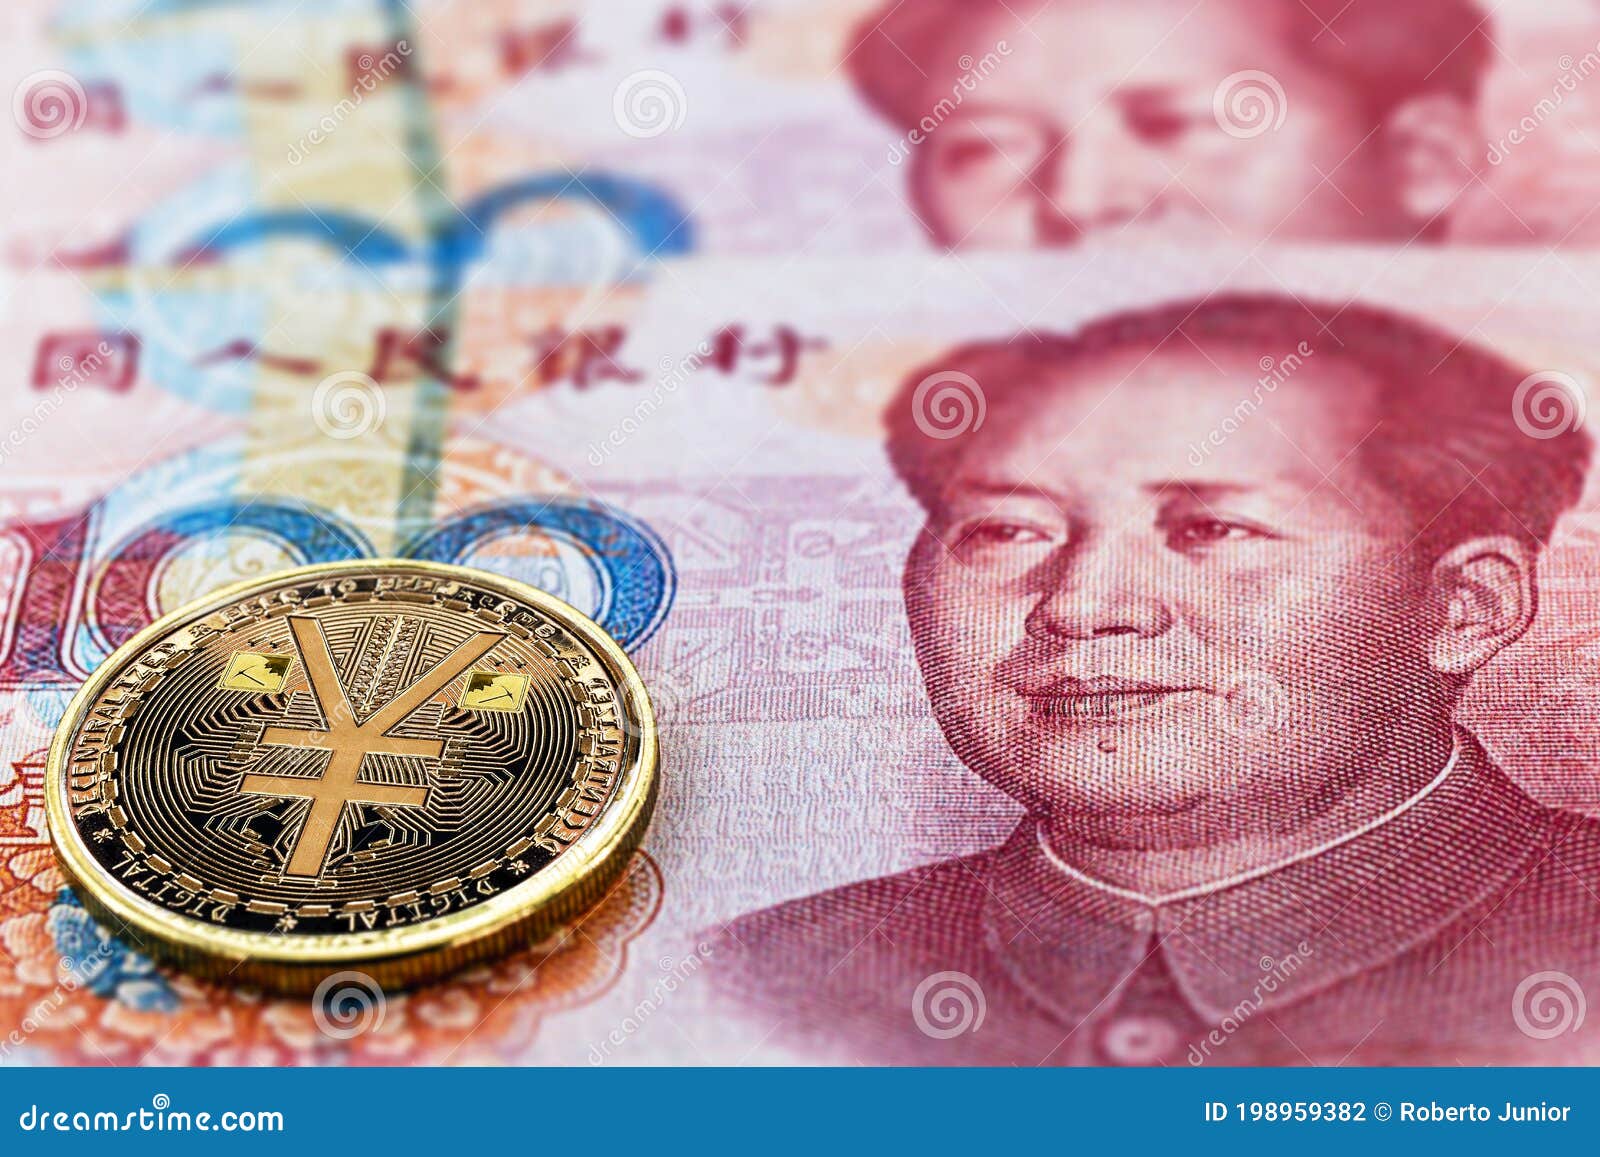 one hundred yuan banknotes, next to an e-rmb gold coin, digital version of the yuan. concept of new digital currency of the